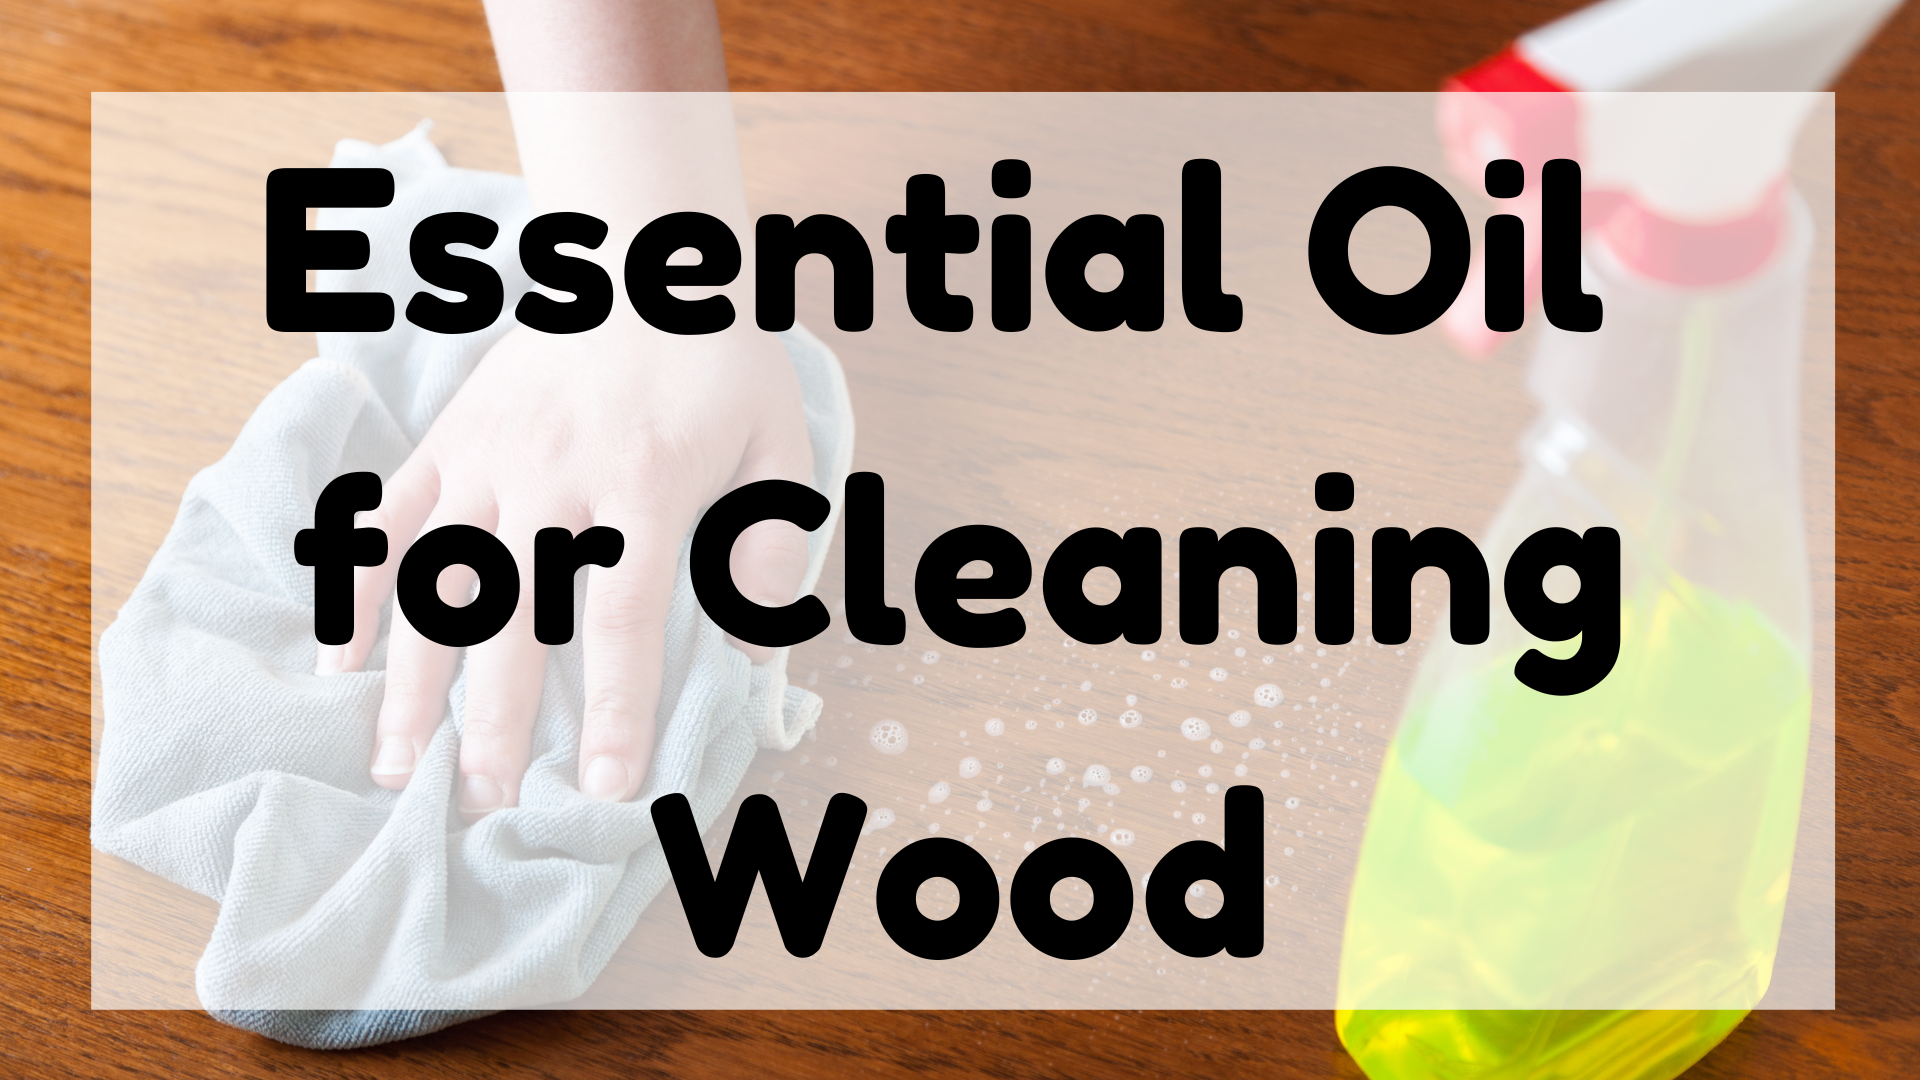 Essential Oil for Cleaning Wood featured image